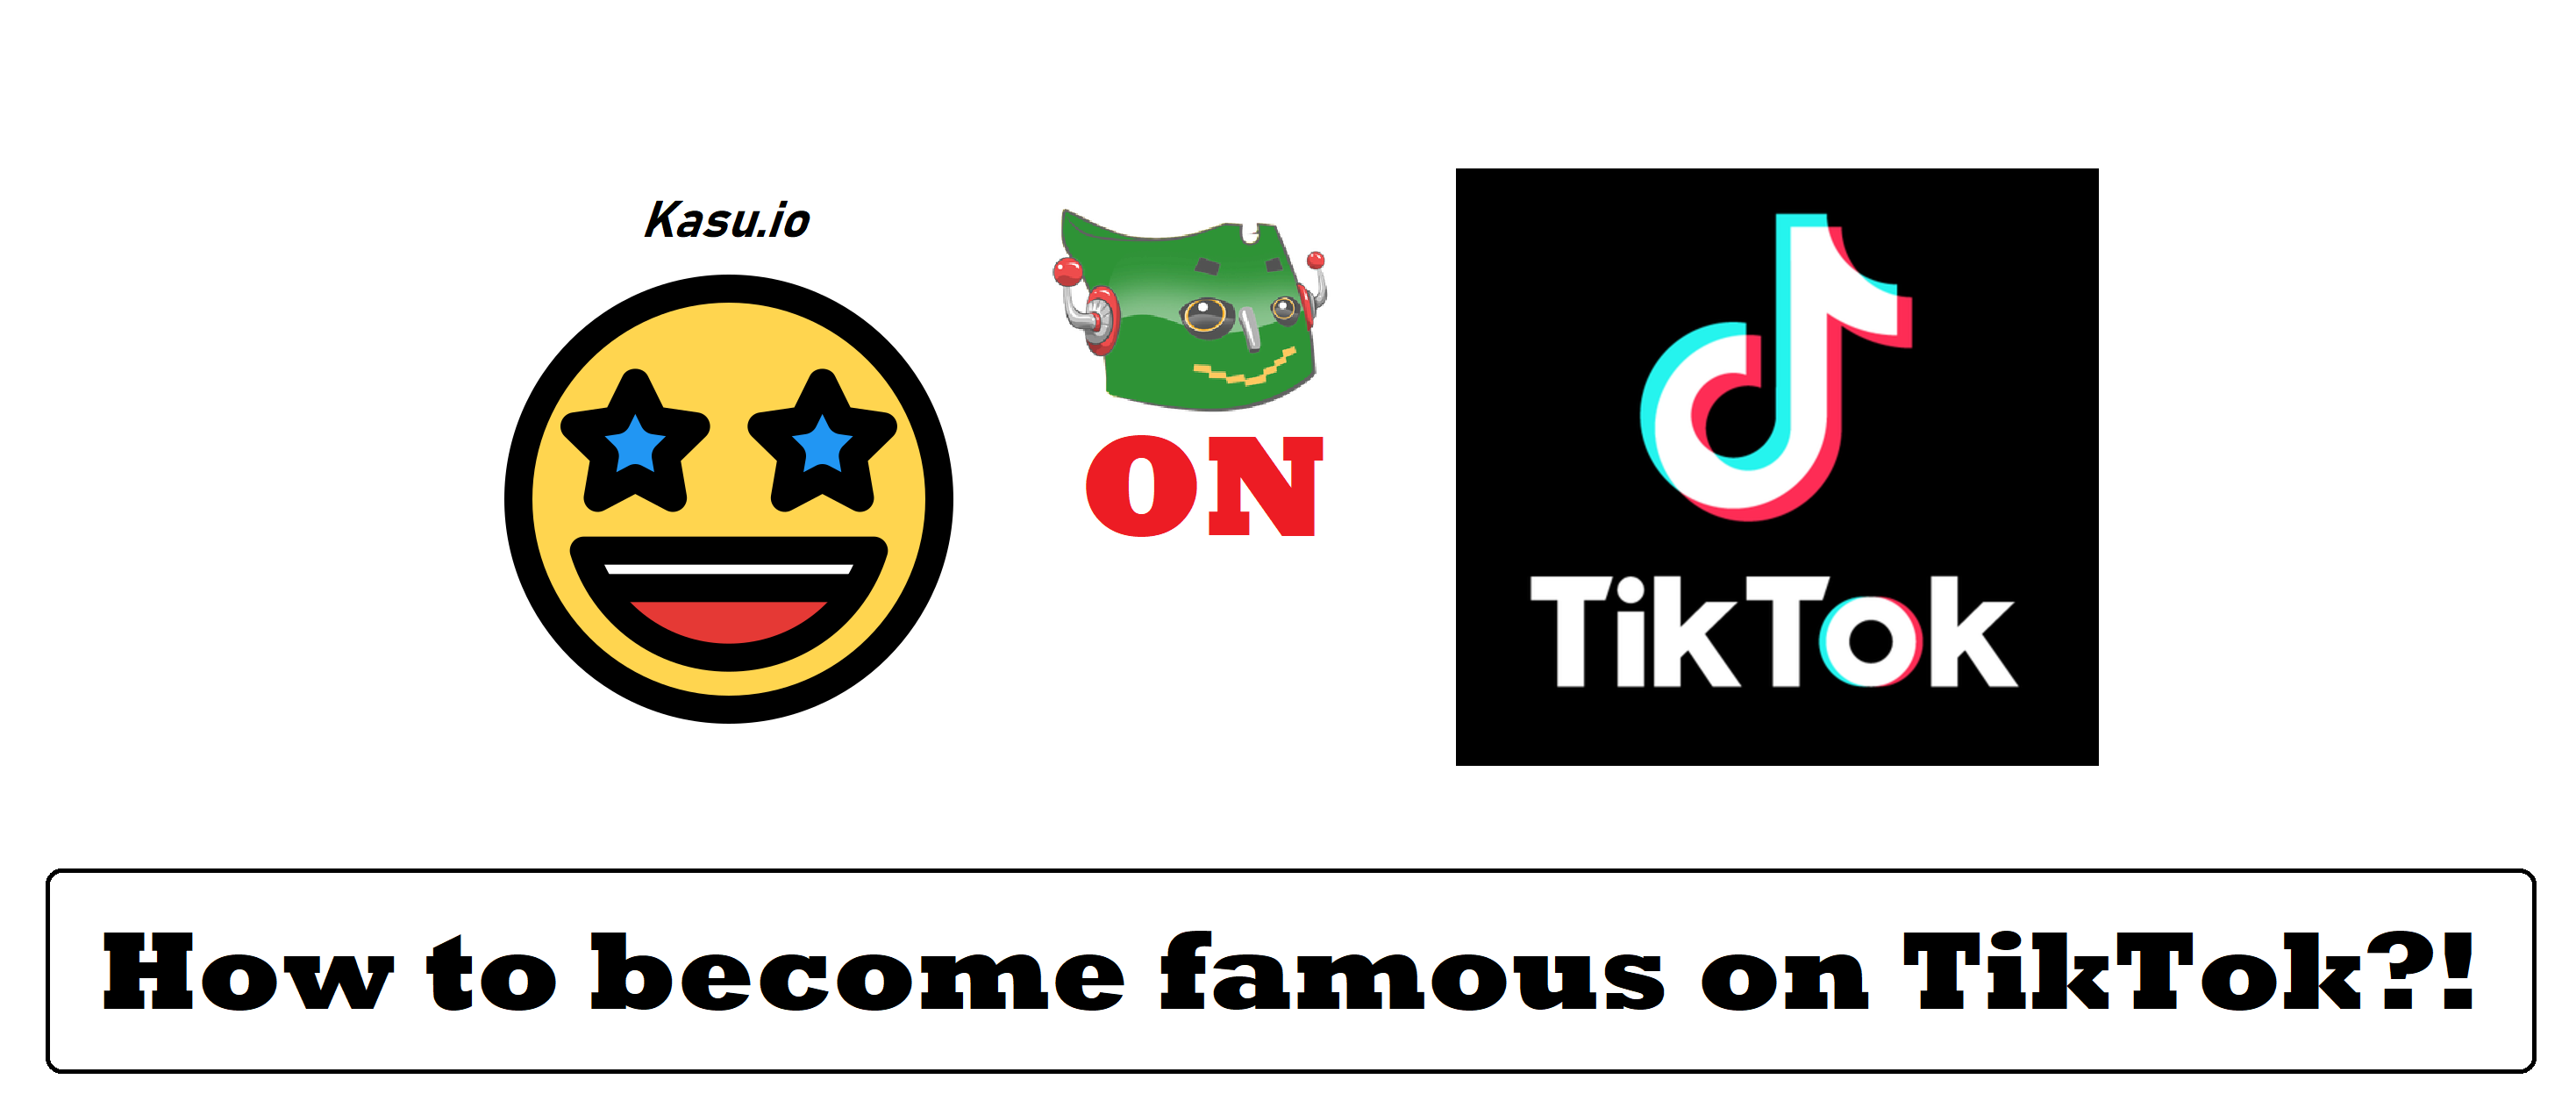 How to become famous on TikTok?